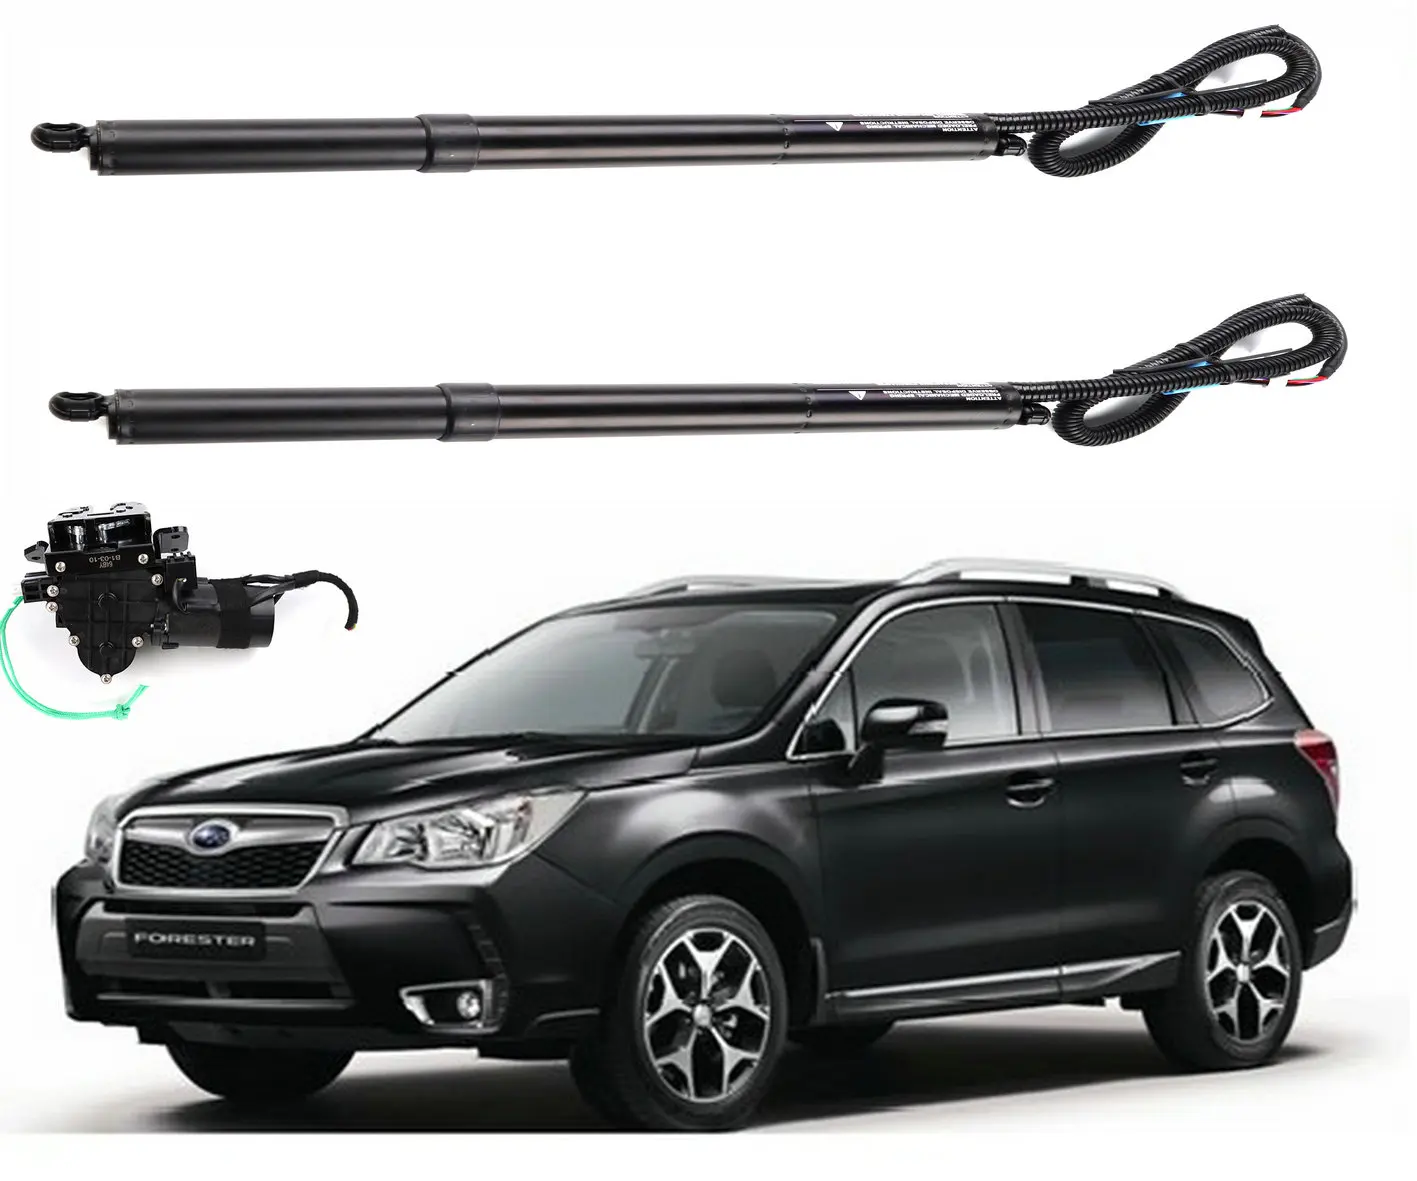 

Factory Sonls automatic trunk opener electric tailgate DS-075 power gate lift for Subaru Forester 2015+